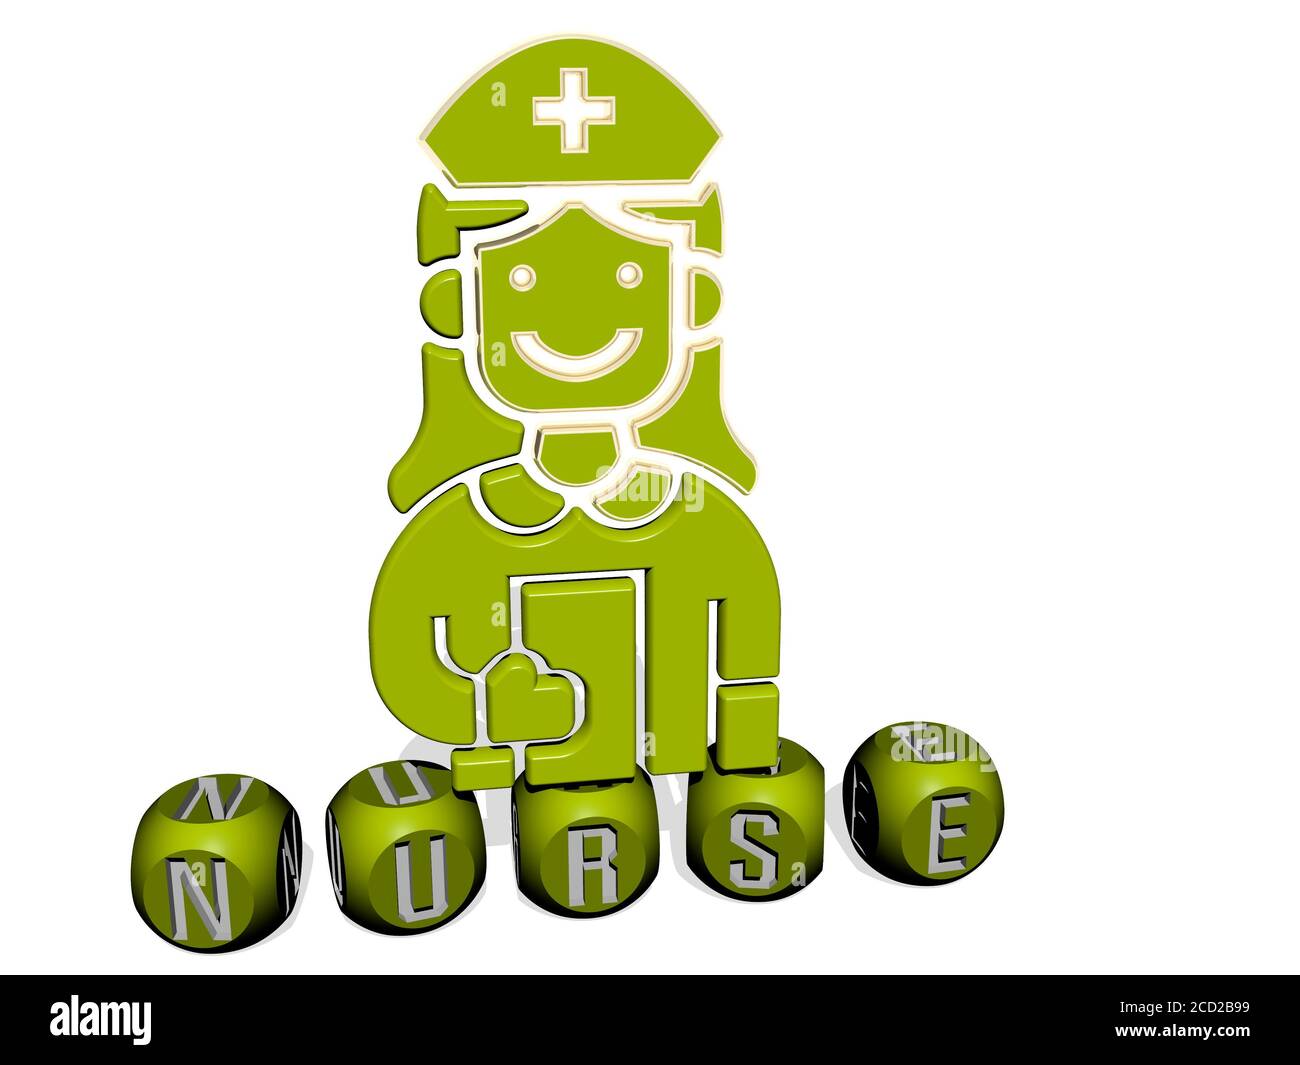 NURSE cubic letters with 3D icon on the top, 3D illustration Stock Photo